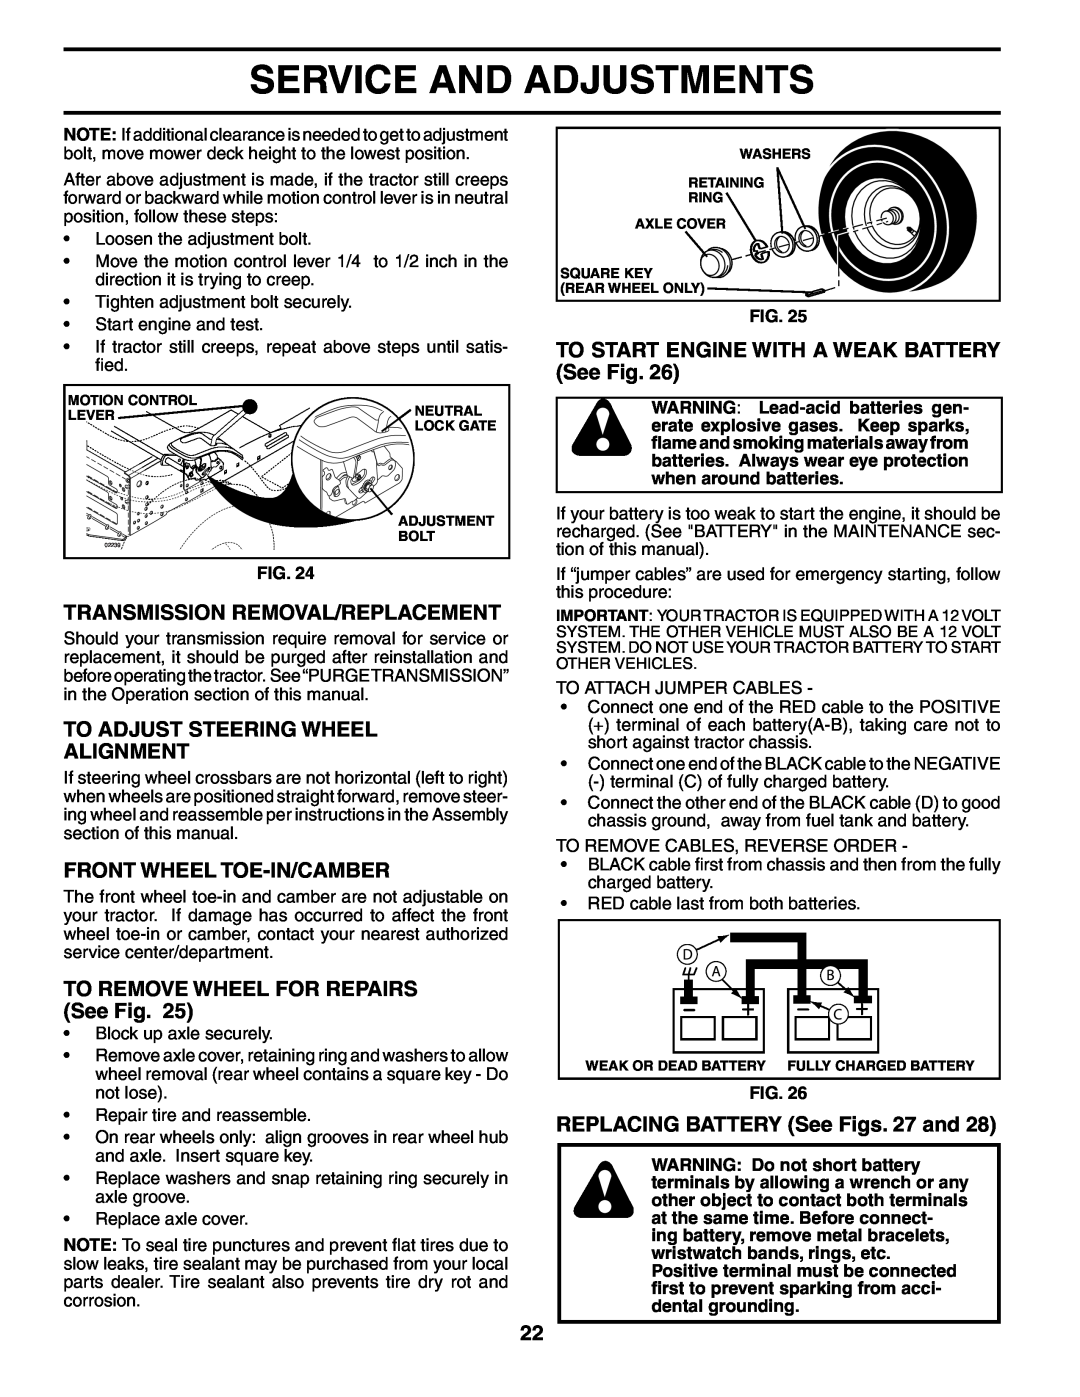 Poulan PO17H42STB manual Transmission Removal/Replacement, To Adjust Steering Wheel Alignment, Front Wheel Toe-In/Camber 